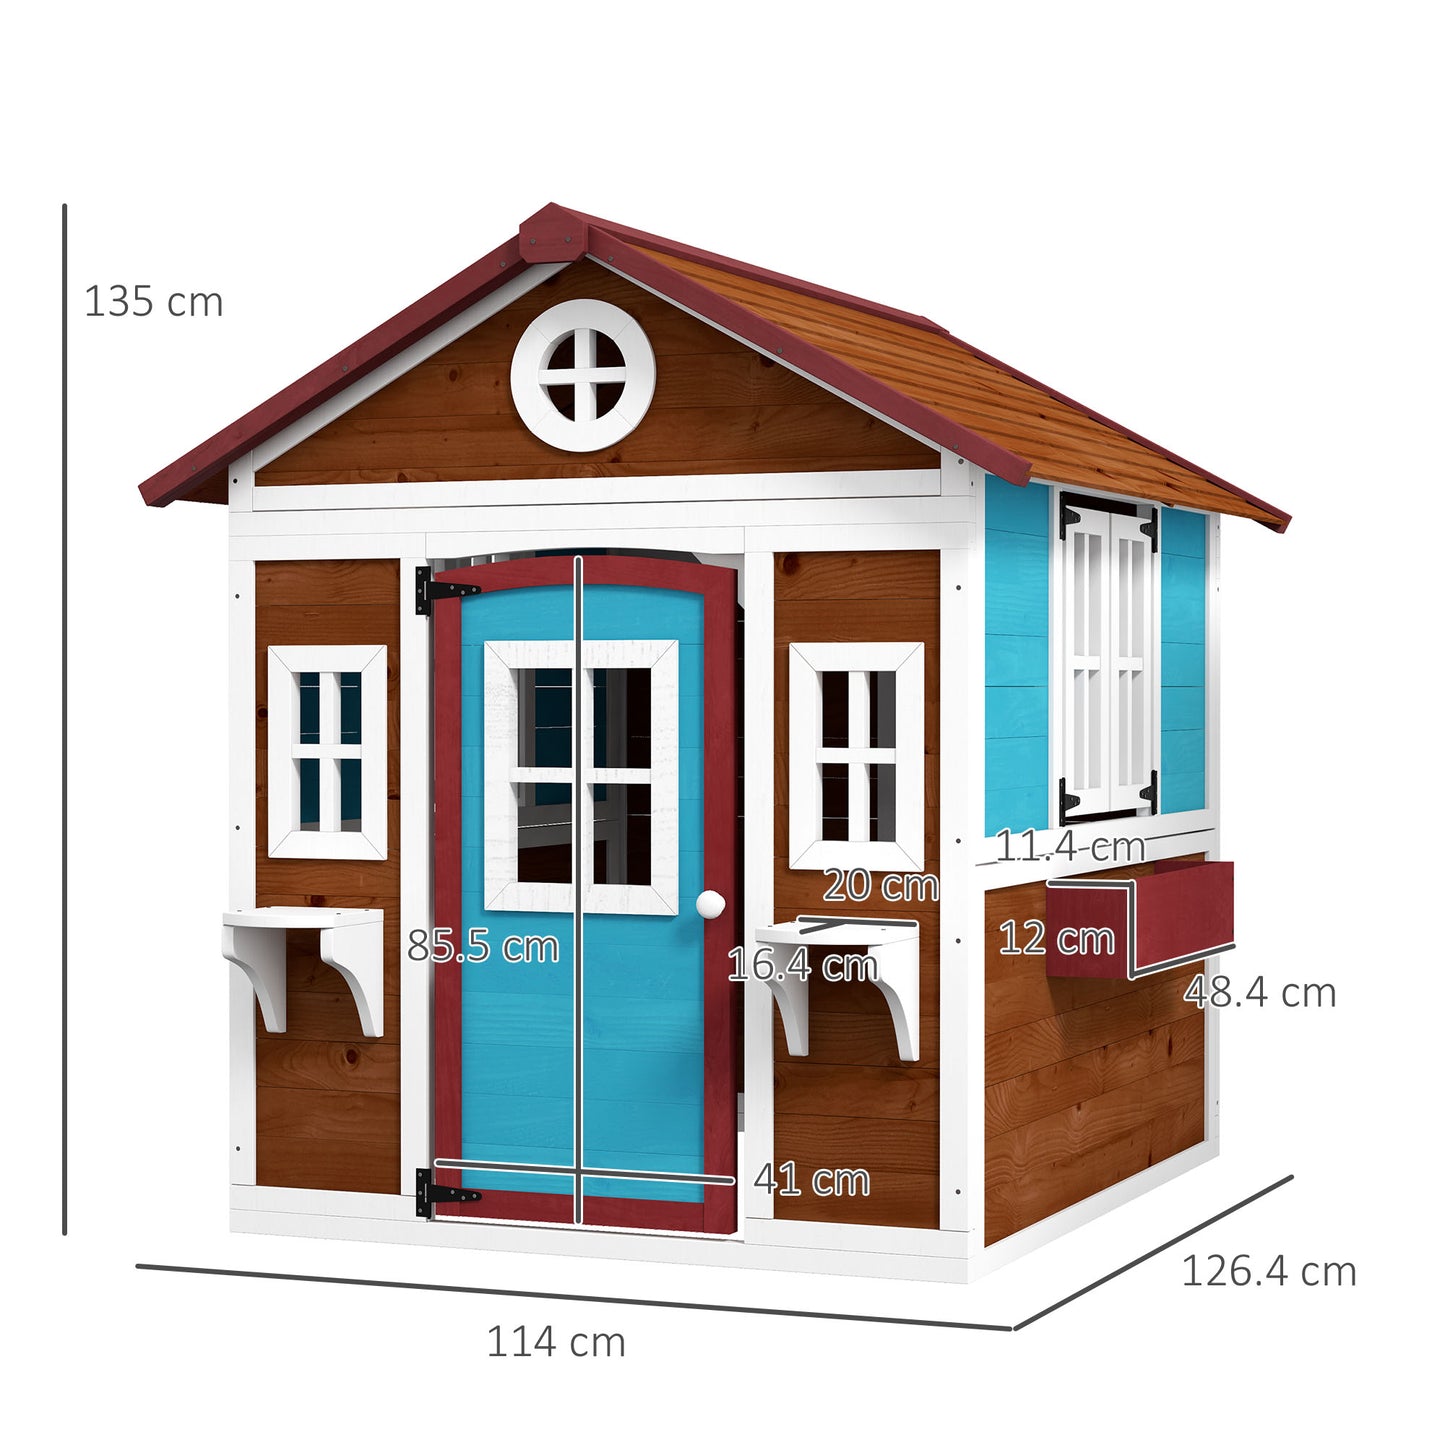 Outsunny Wooden Playhouse with Doors, Windows, Plant Pots, Boxes, for 3-8 Years - Dark Brown